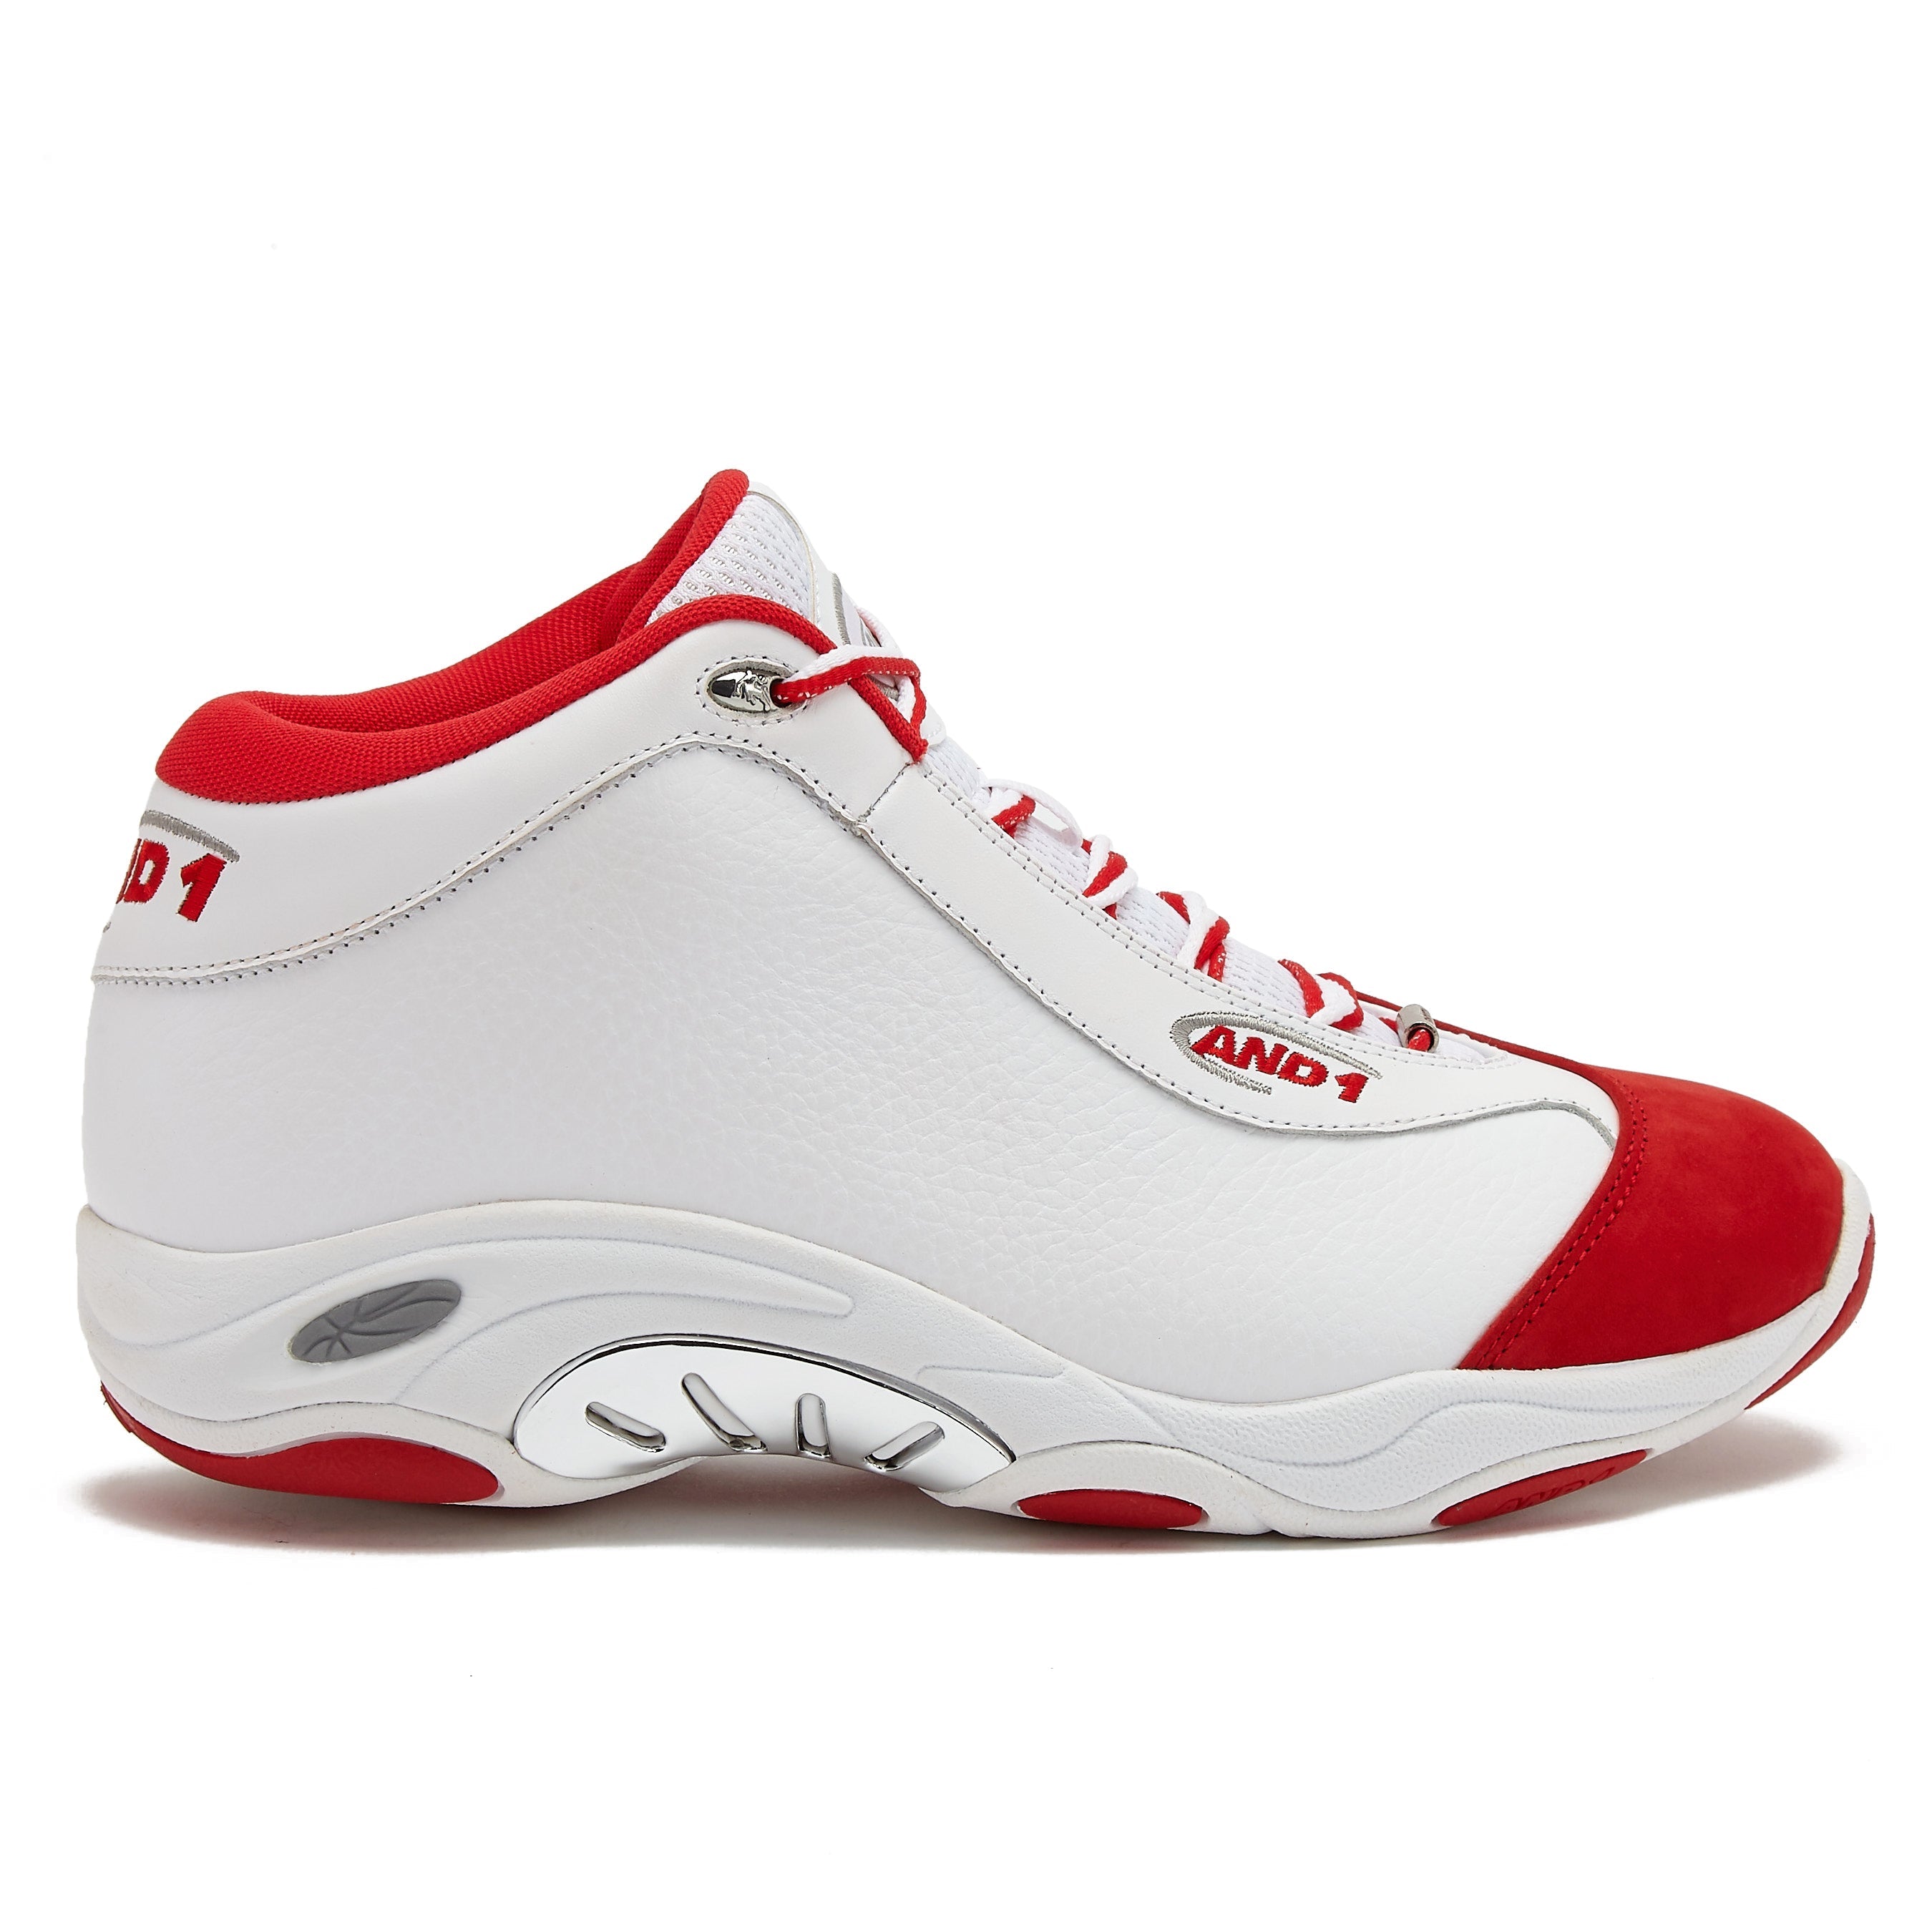 AND1 Tai Chi Basketball Shoes for Men | Indoor or Outdoor Court